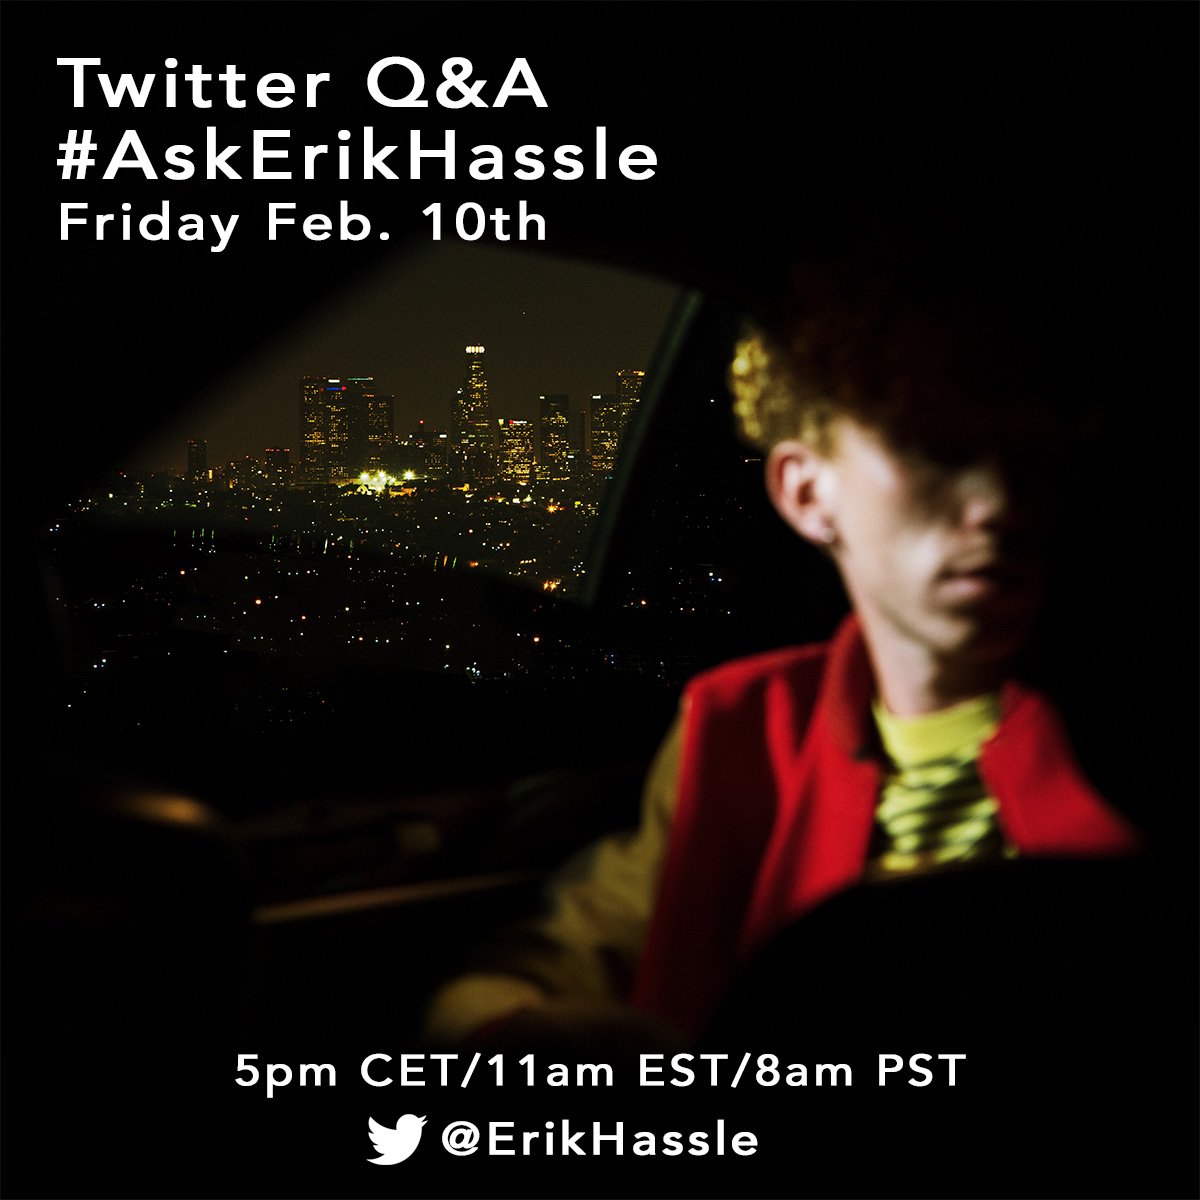 Doin a Q&A later today! Ask me anything with #AskErikHassle 